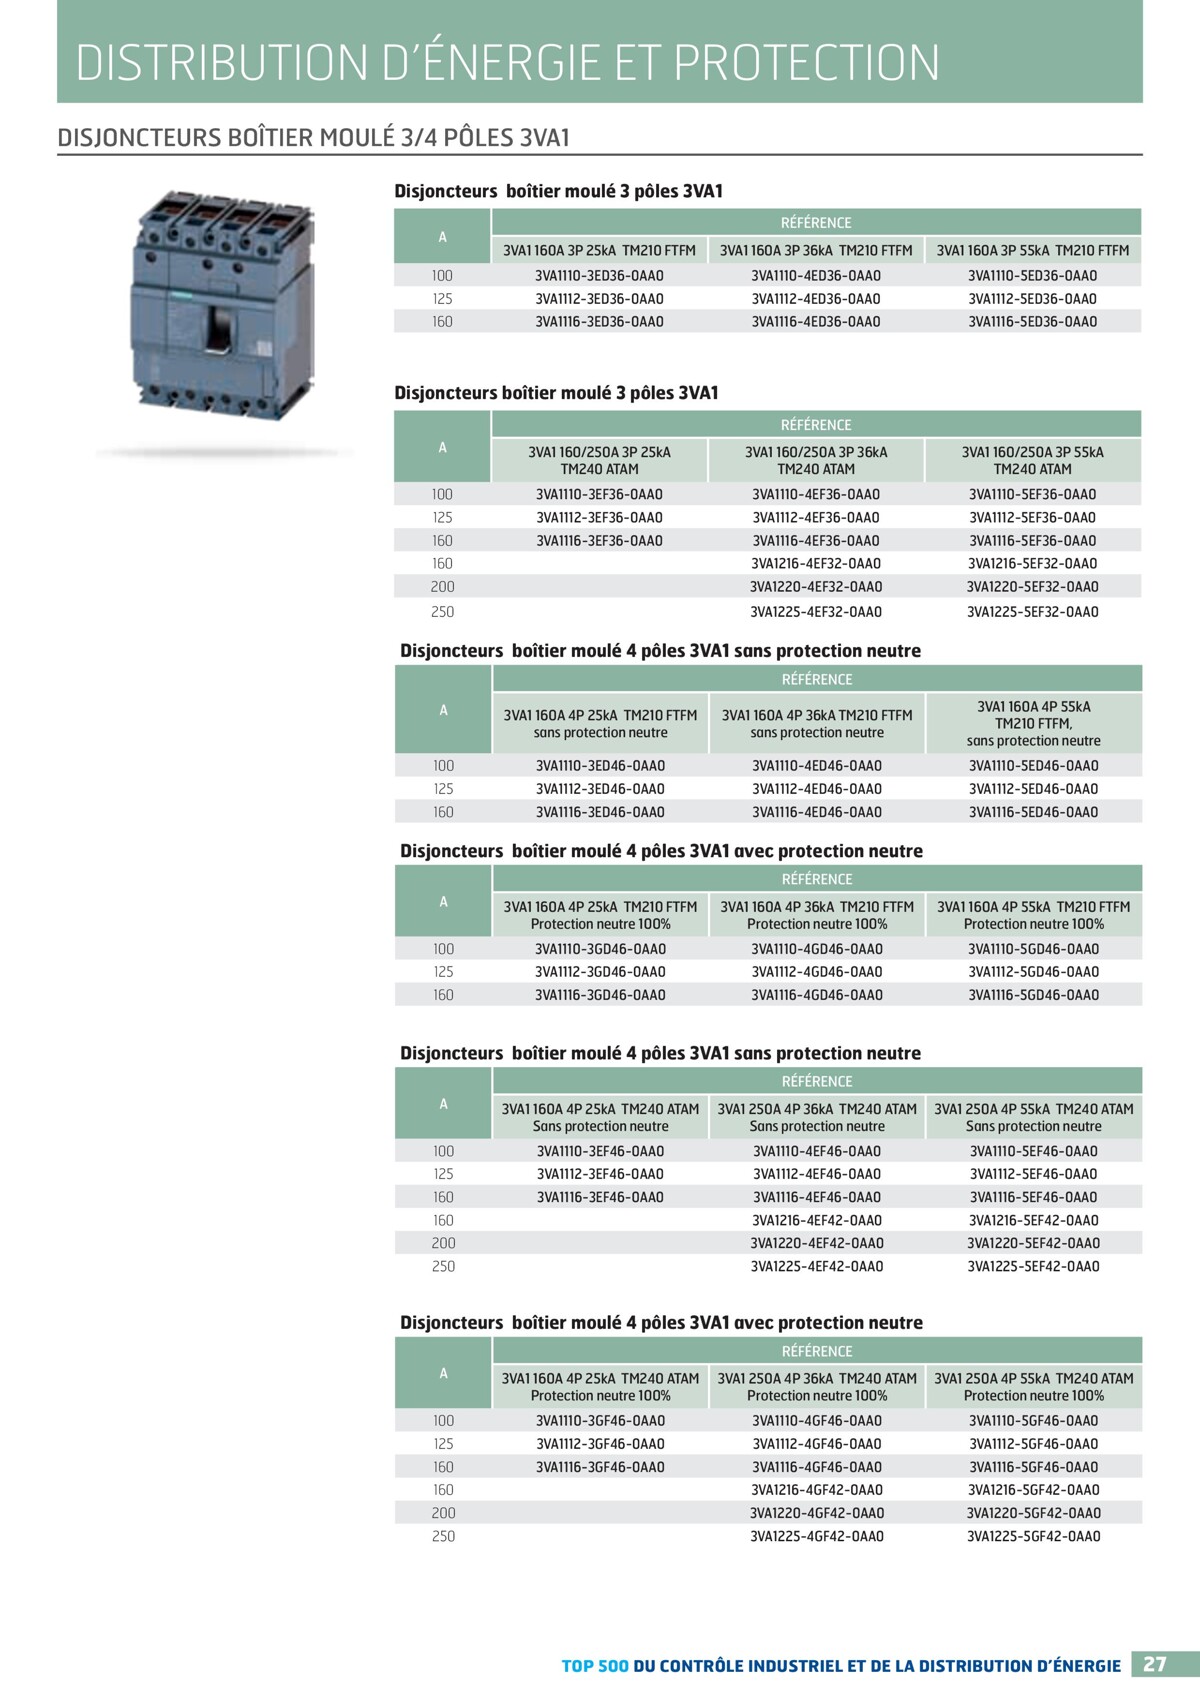 Catalogue TOP 500 siemens - Rexel, page 00027